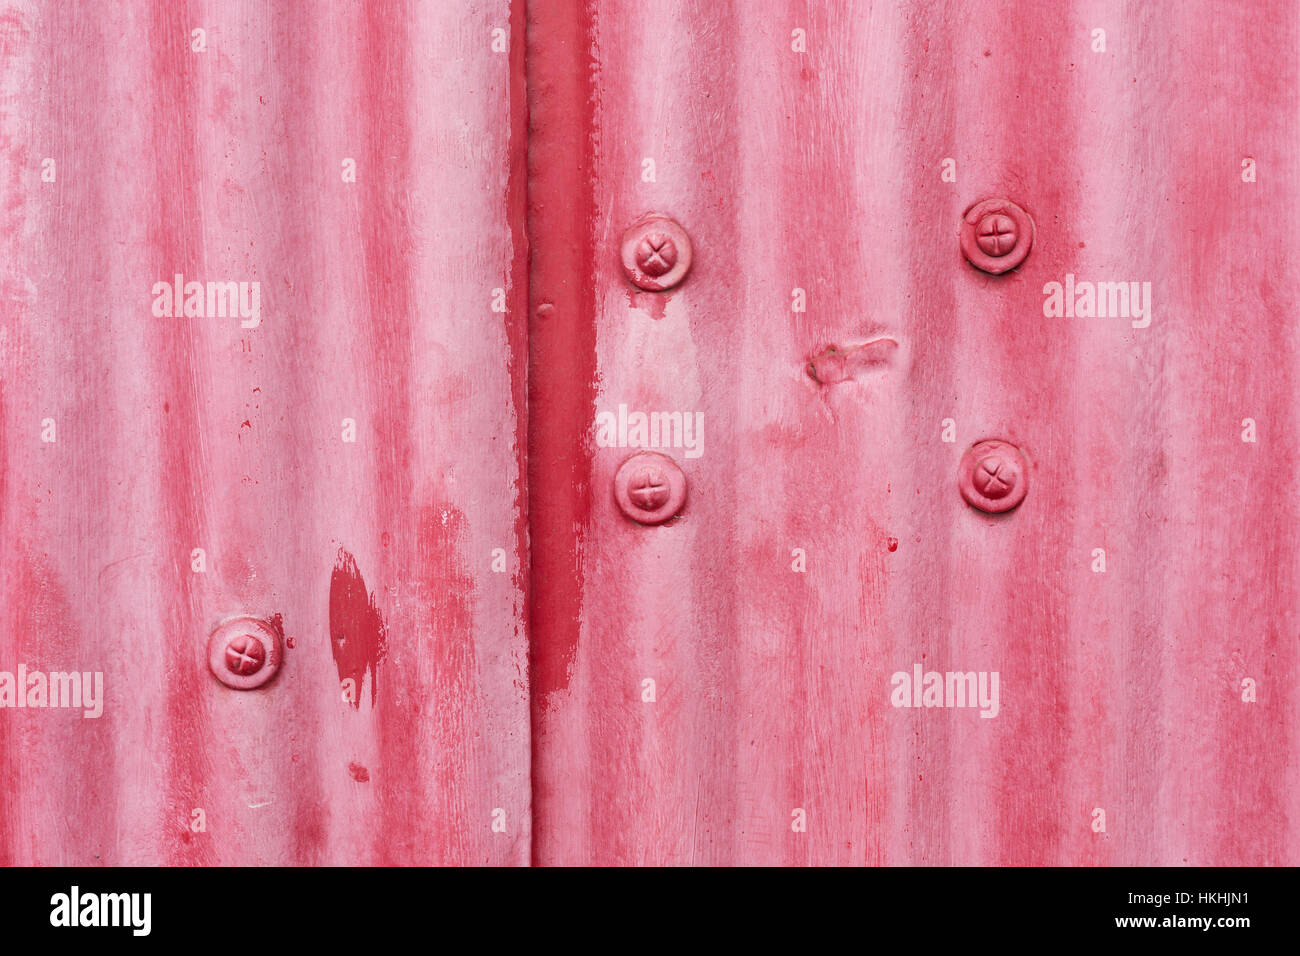 Close up of red painted metal with a corrugated texture and rivets Stock Photo